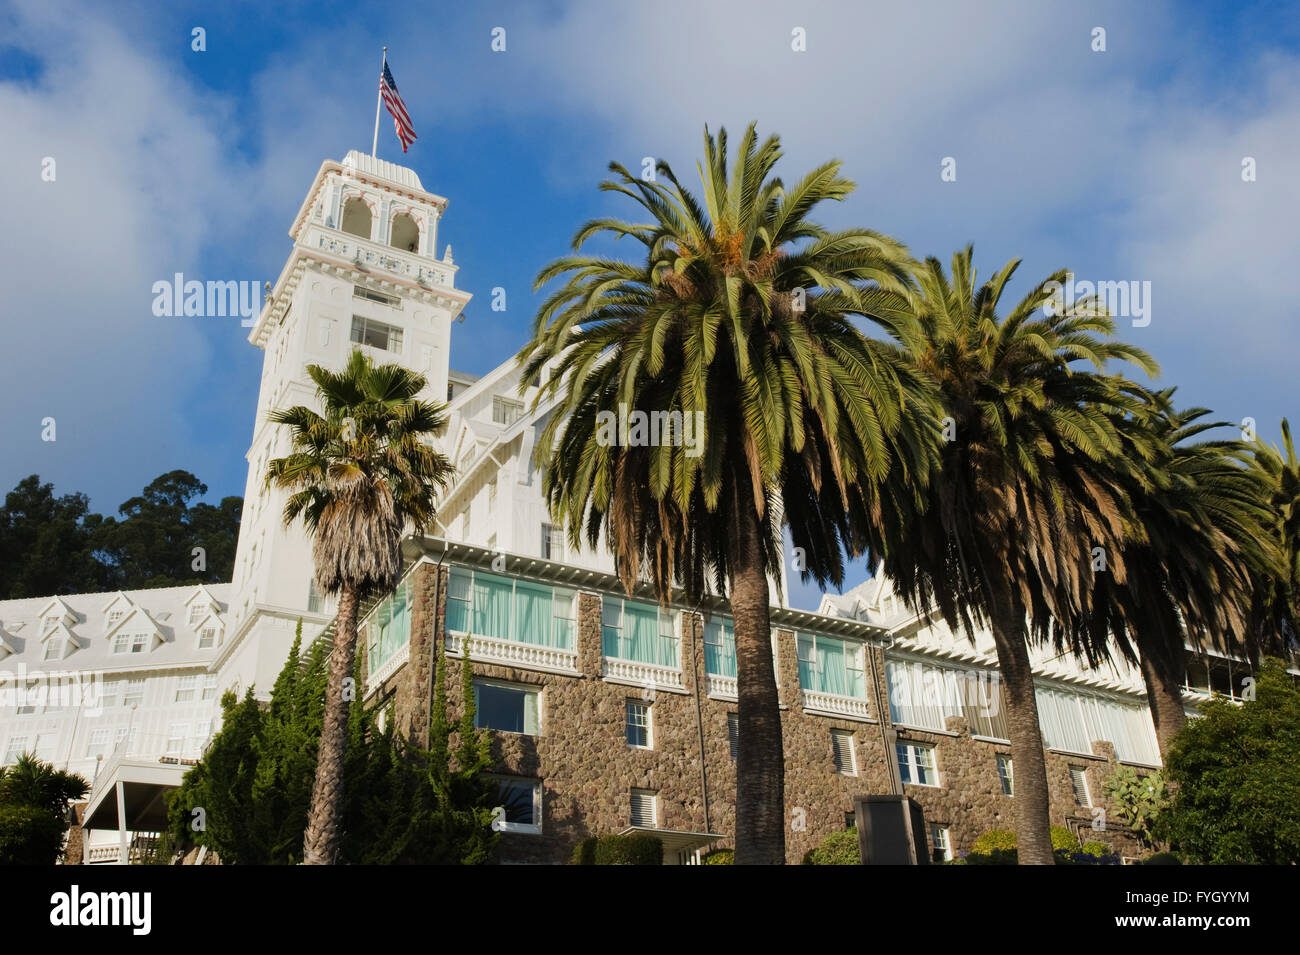 Claremont Hotel and Resort, Historic Hotel at dusk with Palm Trees, Berkeley, California USA Stock Photo